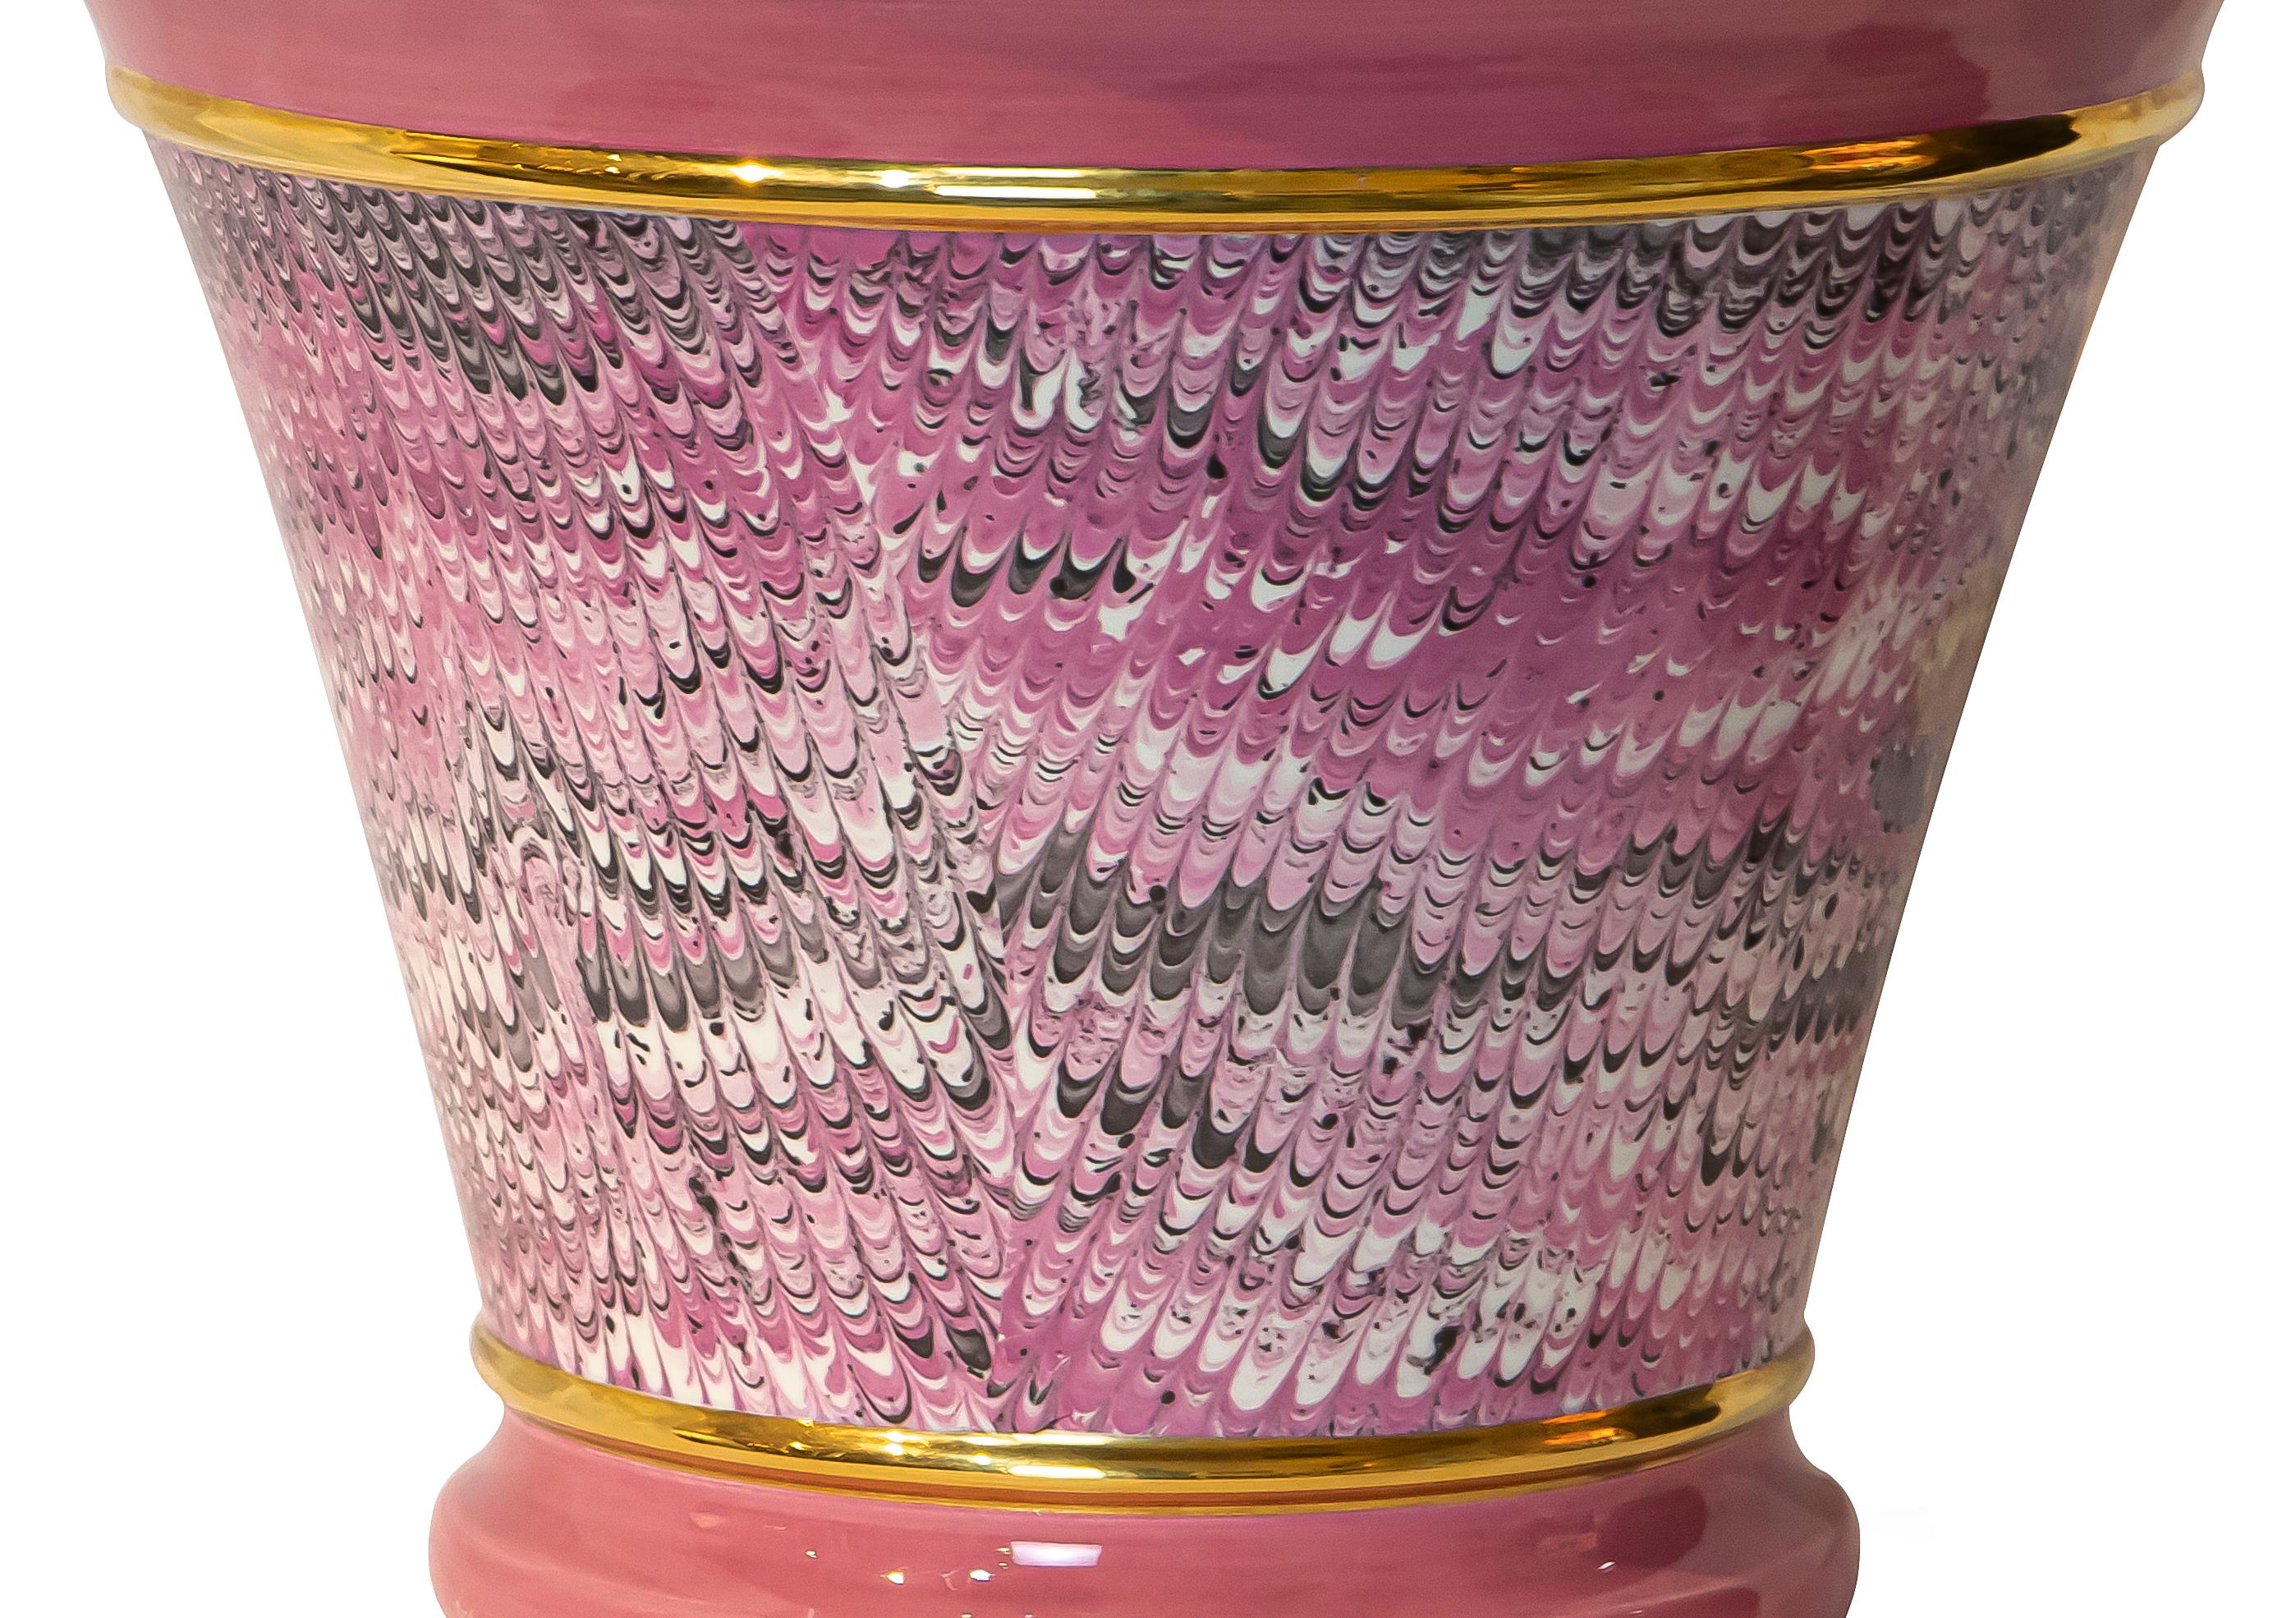 Cachepot is a fashionable colored vase realized by Tommaso Barbi for B Ceramiche in the 1970s

Good conditions except for some loss of color on the higher edges.

Pink ceramic vase with a gilded decoration.